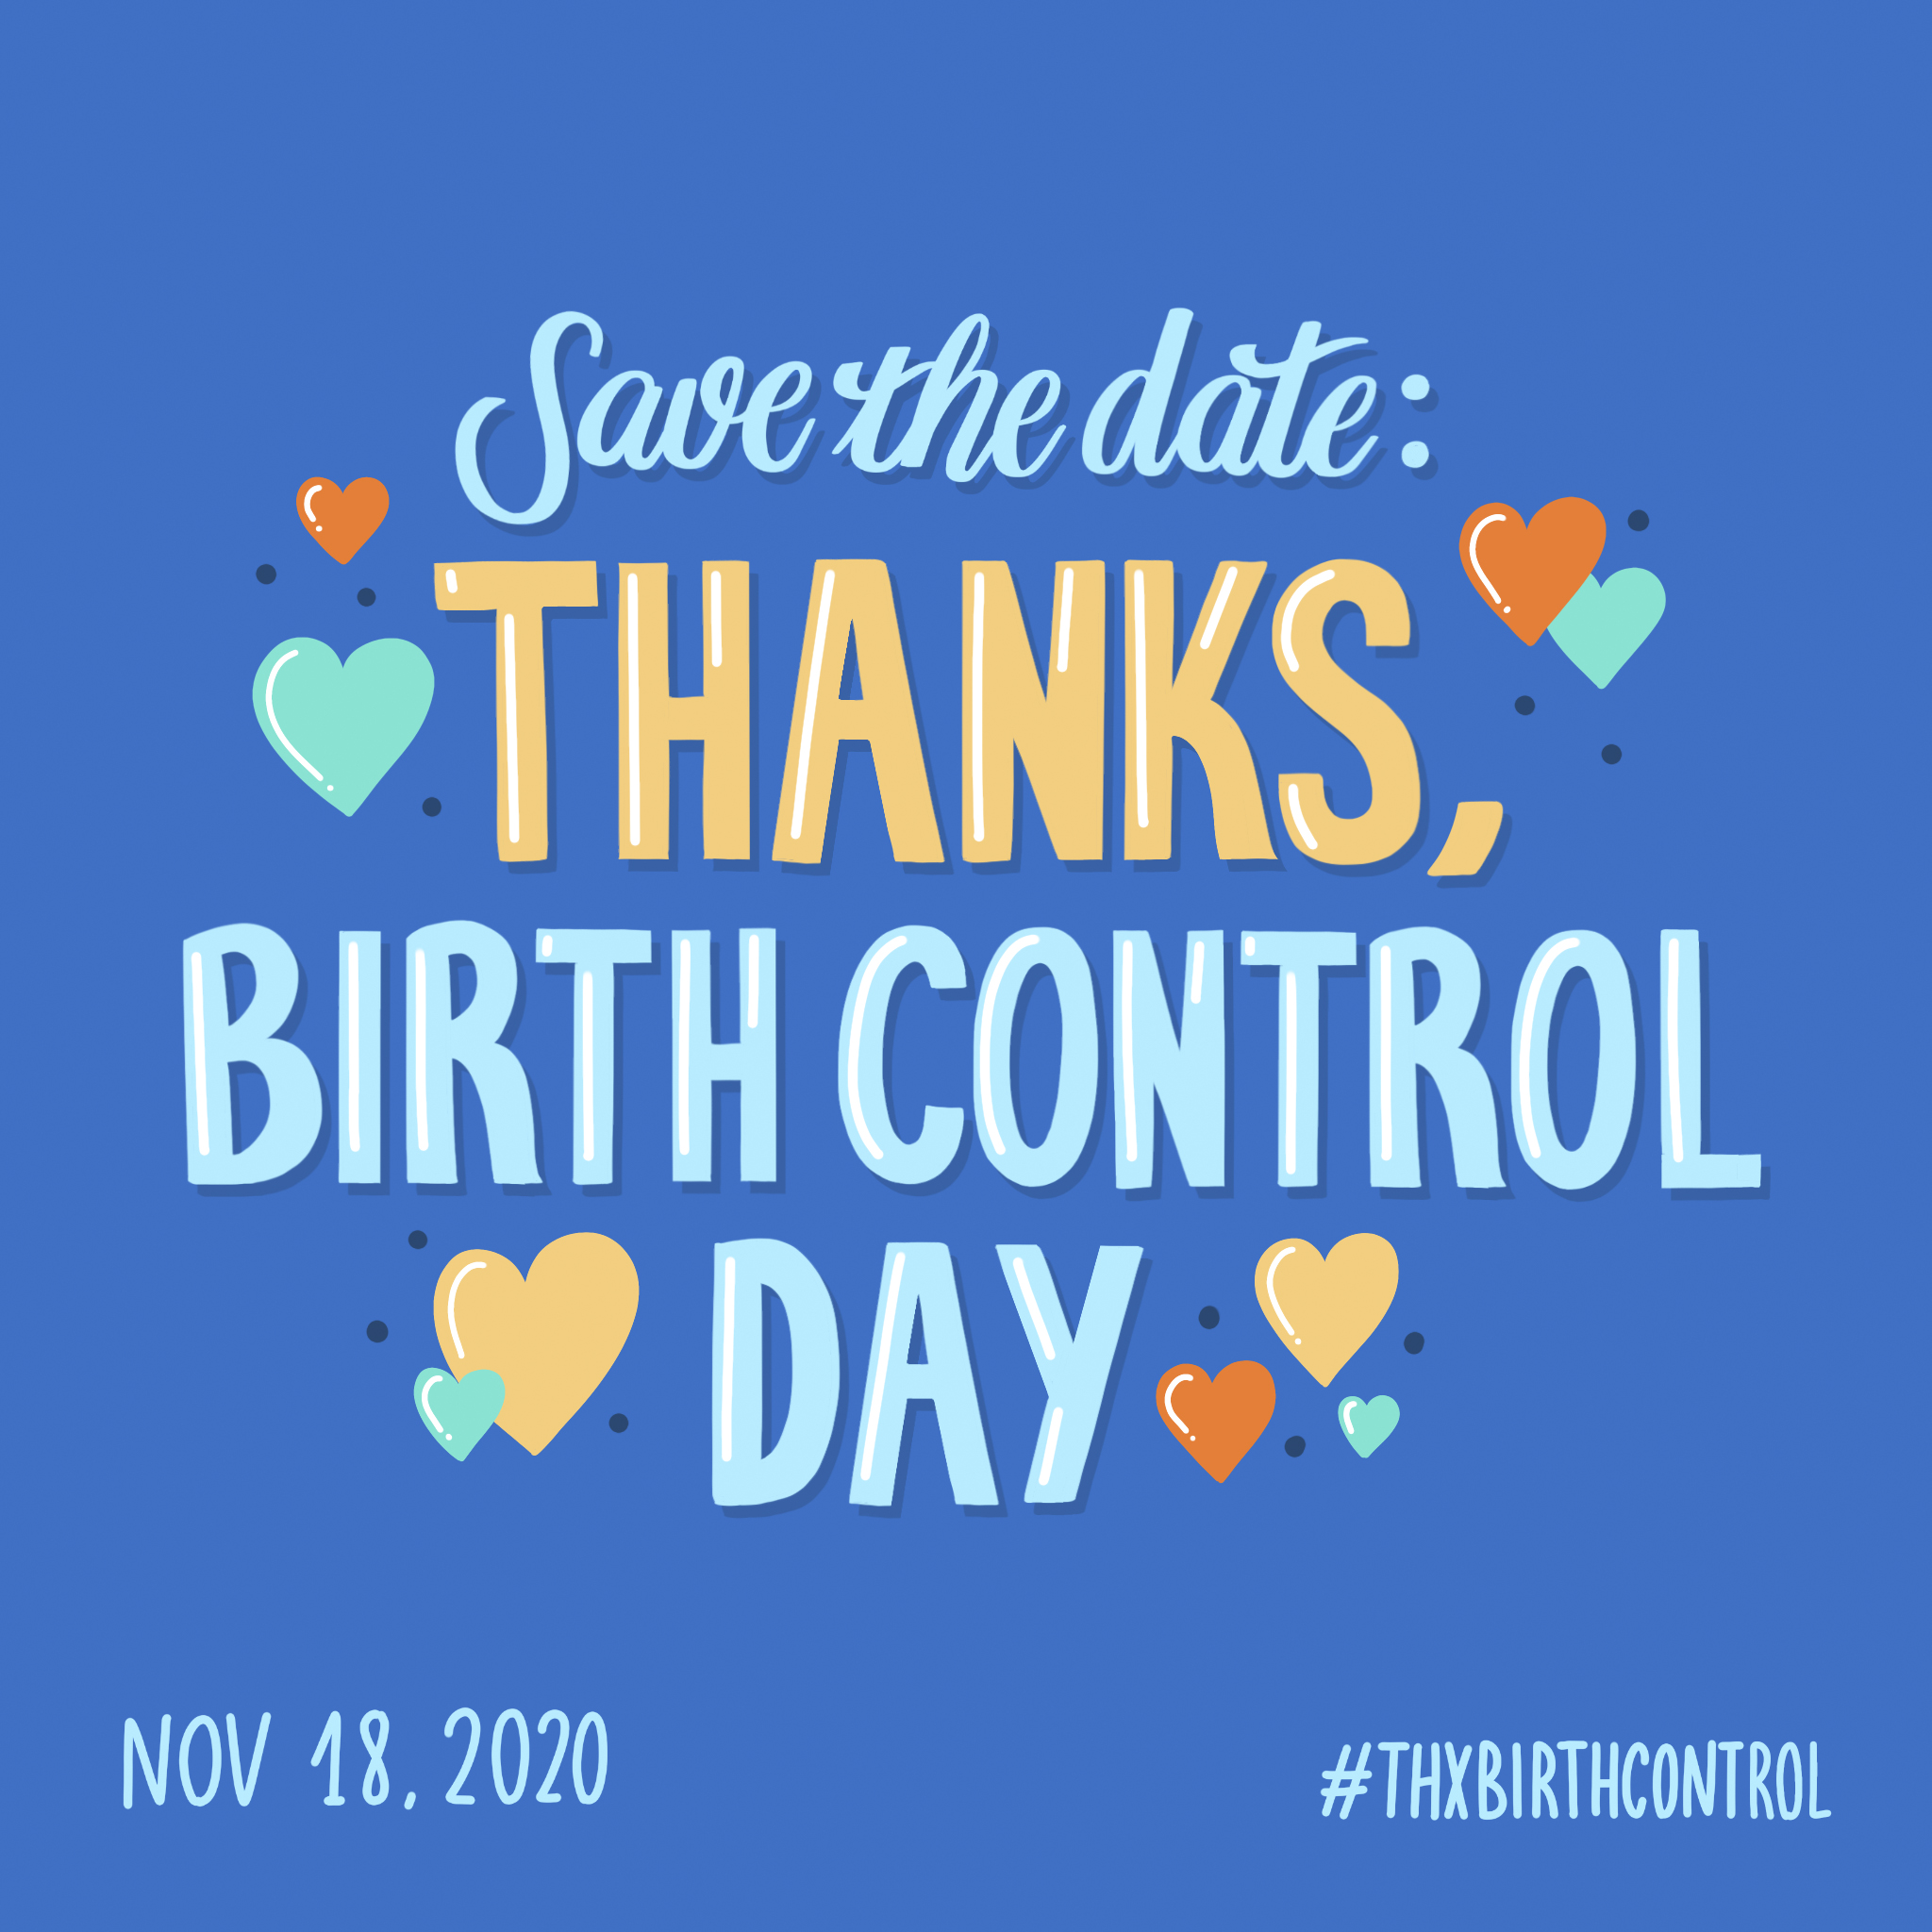 A graphic which reads, "Save the date: Thanks, Birth Control Day Nov. 18, 2020." with multi-colored hearts around it. 